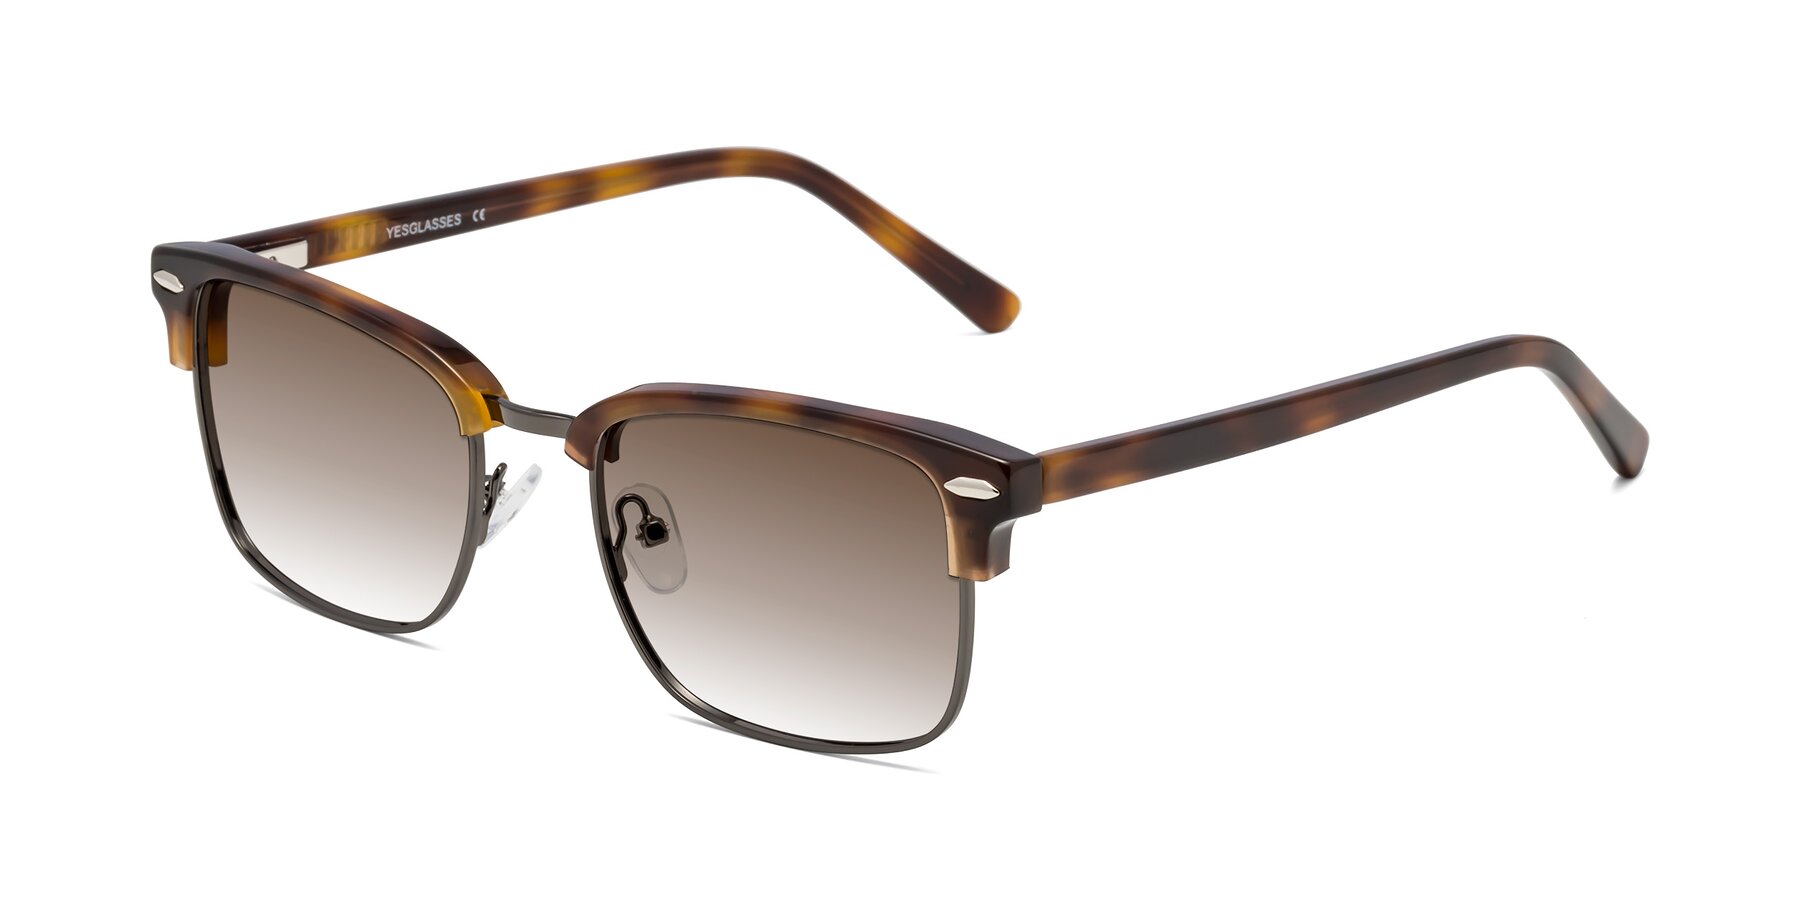 Angle of 17464 in Tortoise/ Gunmetal with Brown Gradient Lenses